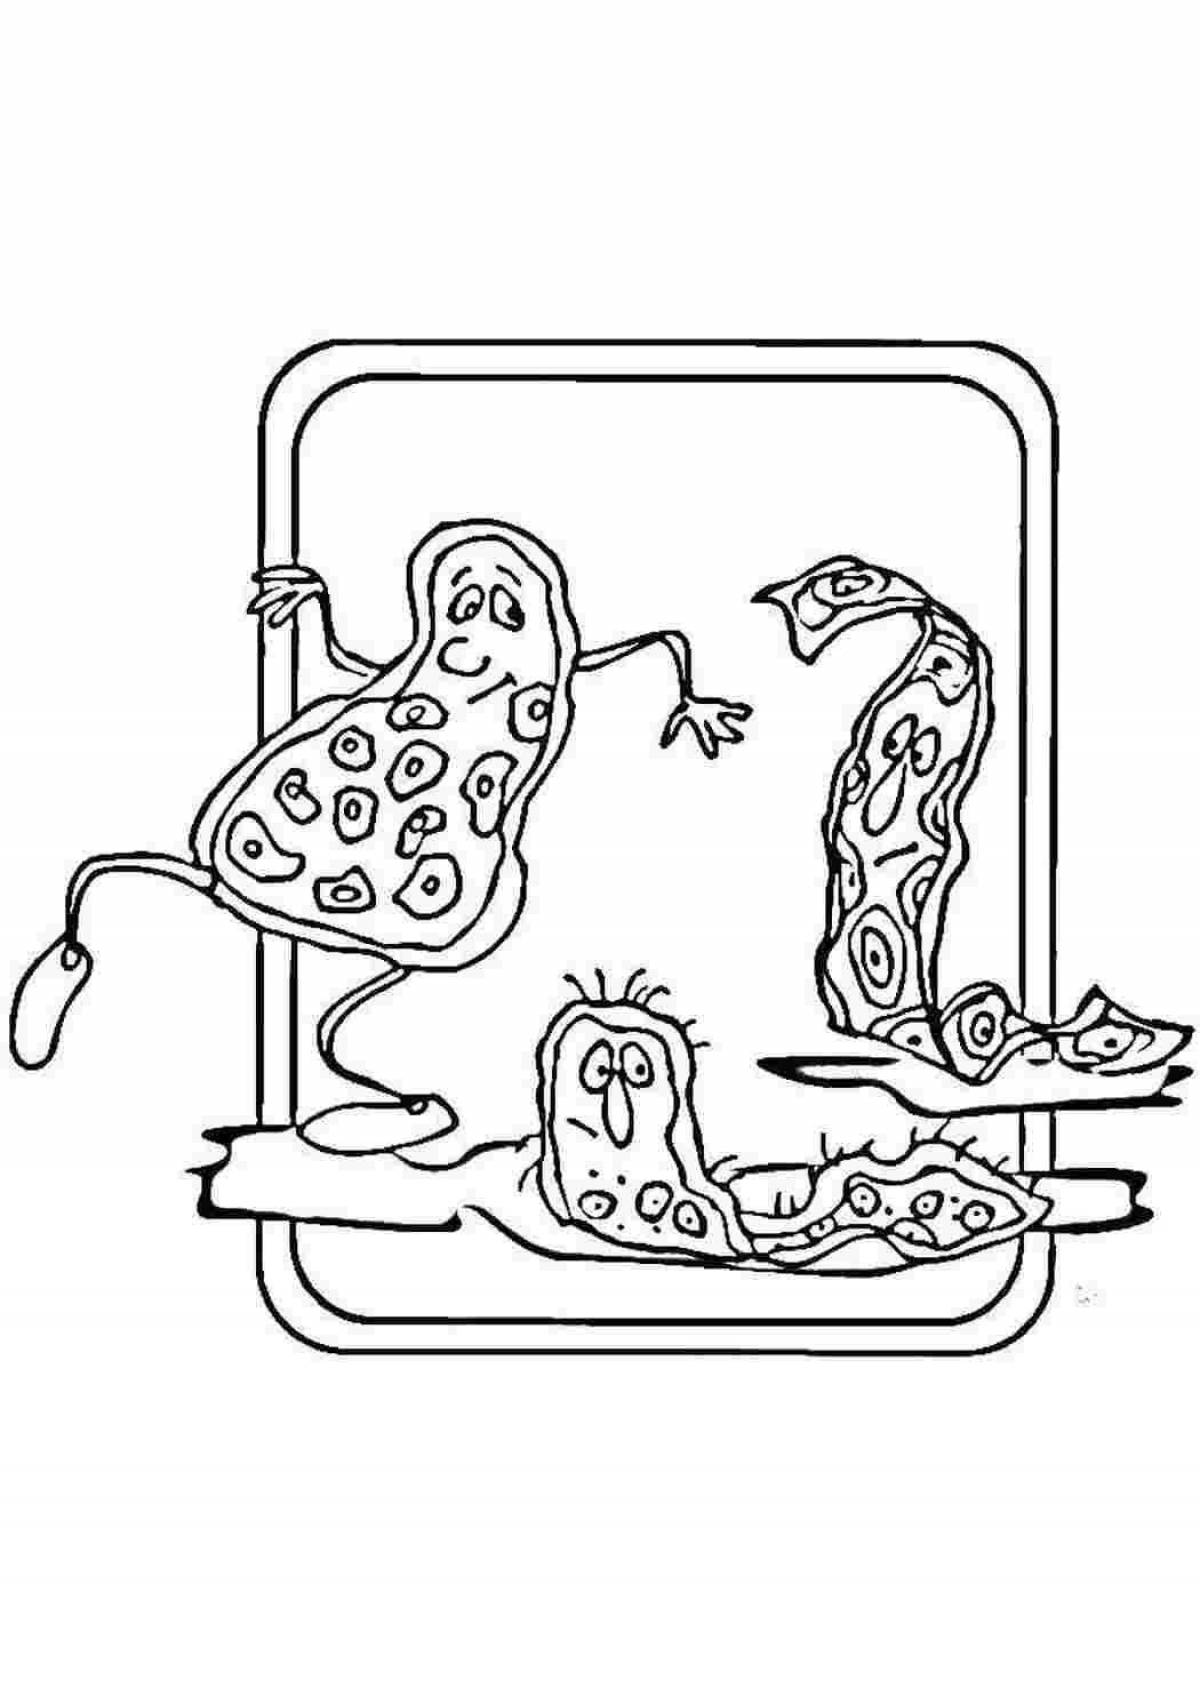 Sweet microbes and bacteria coloring page